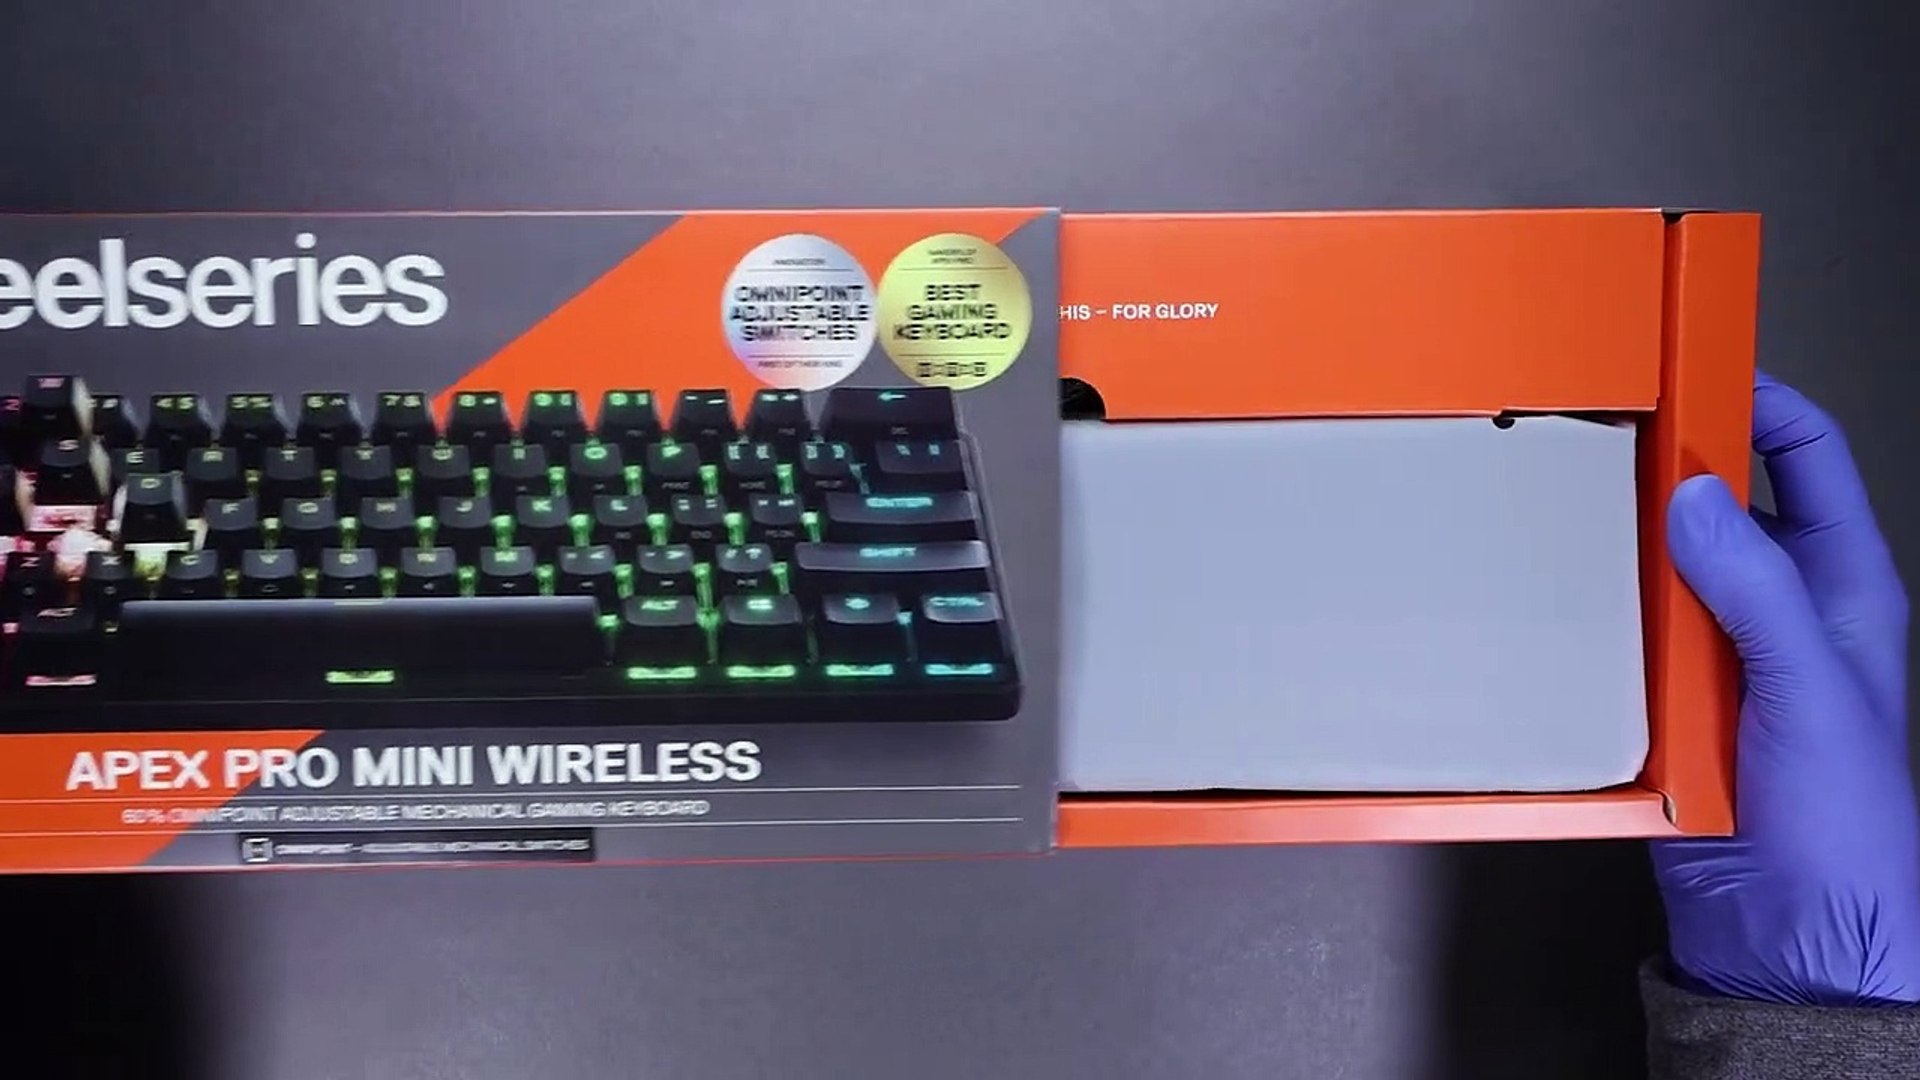 Apex Pro Mini Wireless Gaming Keyboard Unboxing - video Dailymotion